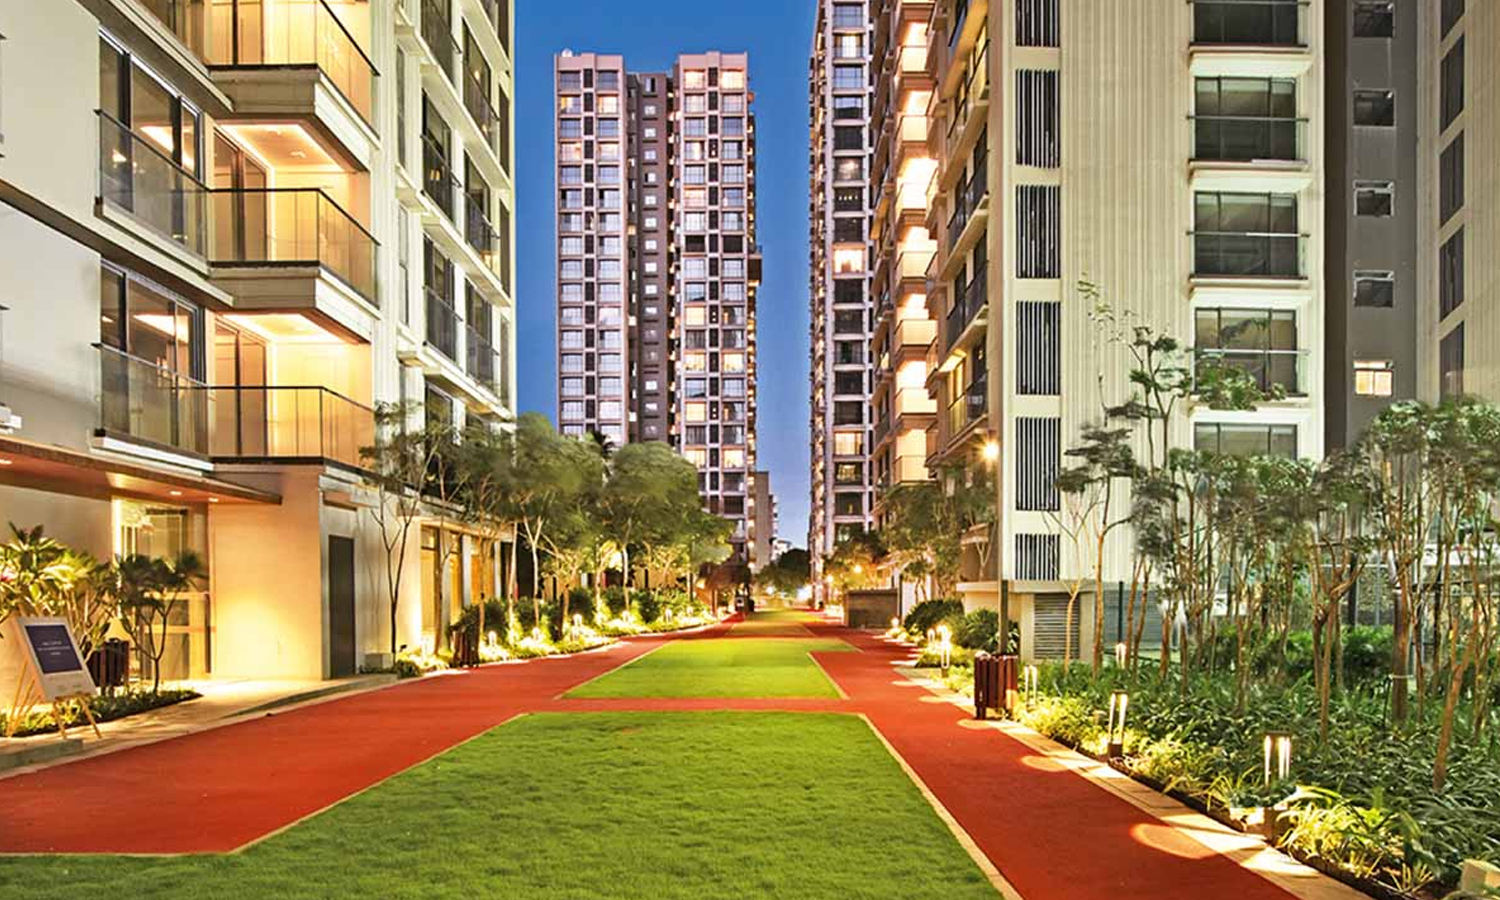 Rustomjee Residential  Projects in Mumbai